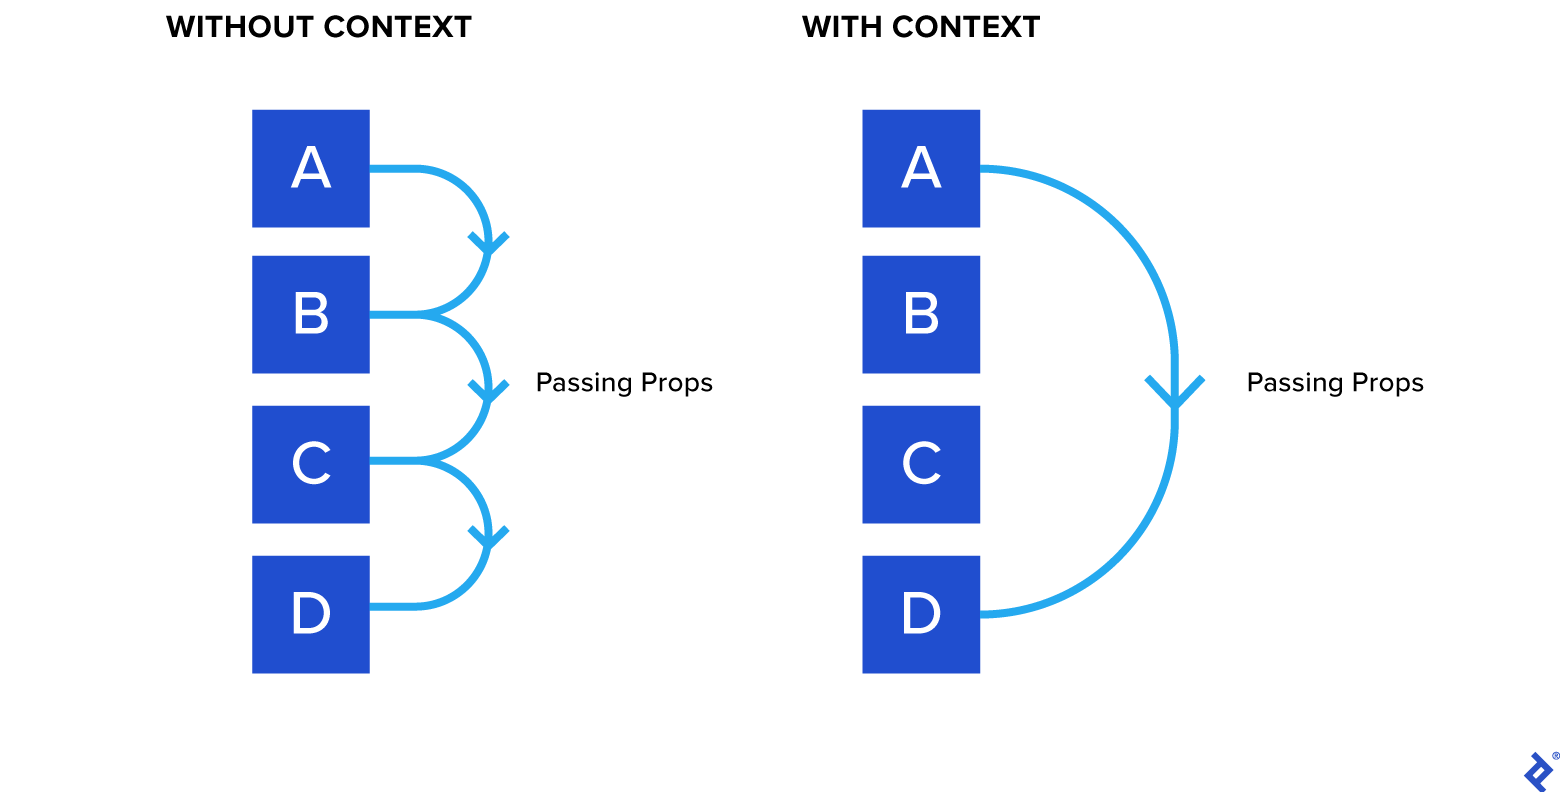 Two sets of four boxes with each set labeled A through D. The Without Context set shows passing props from A to B, B to C, B to C, C to D. The With Context set passes props directly from A to D.